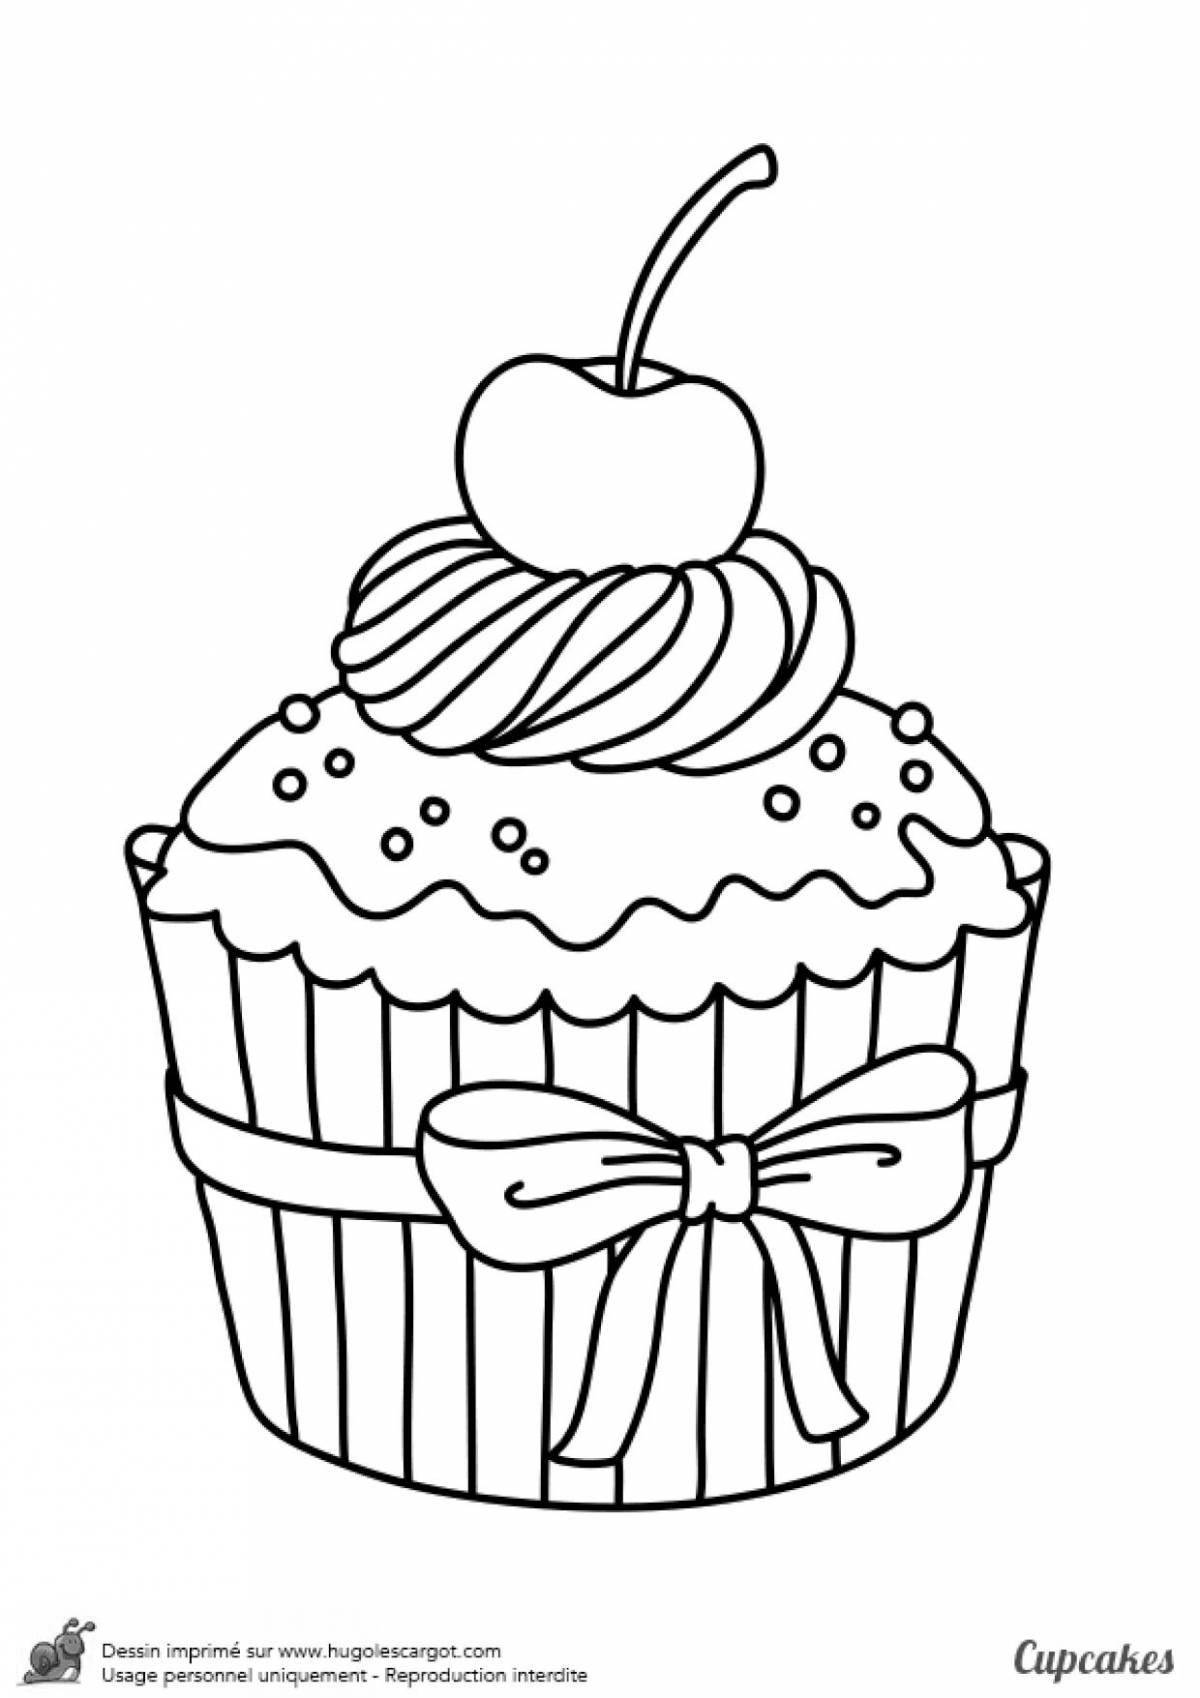 Fluffy pastry coloring book